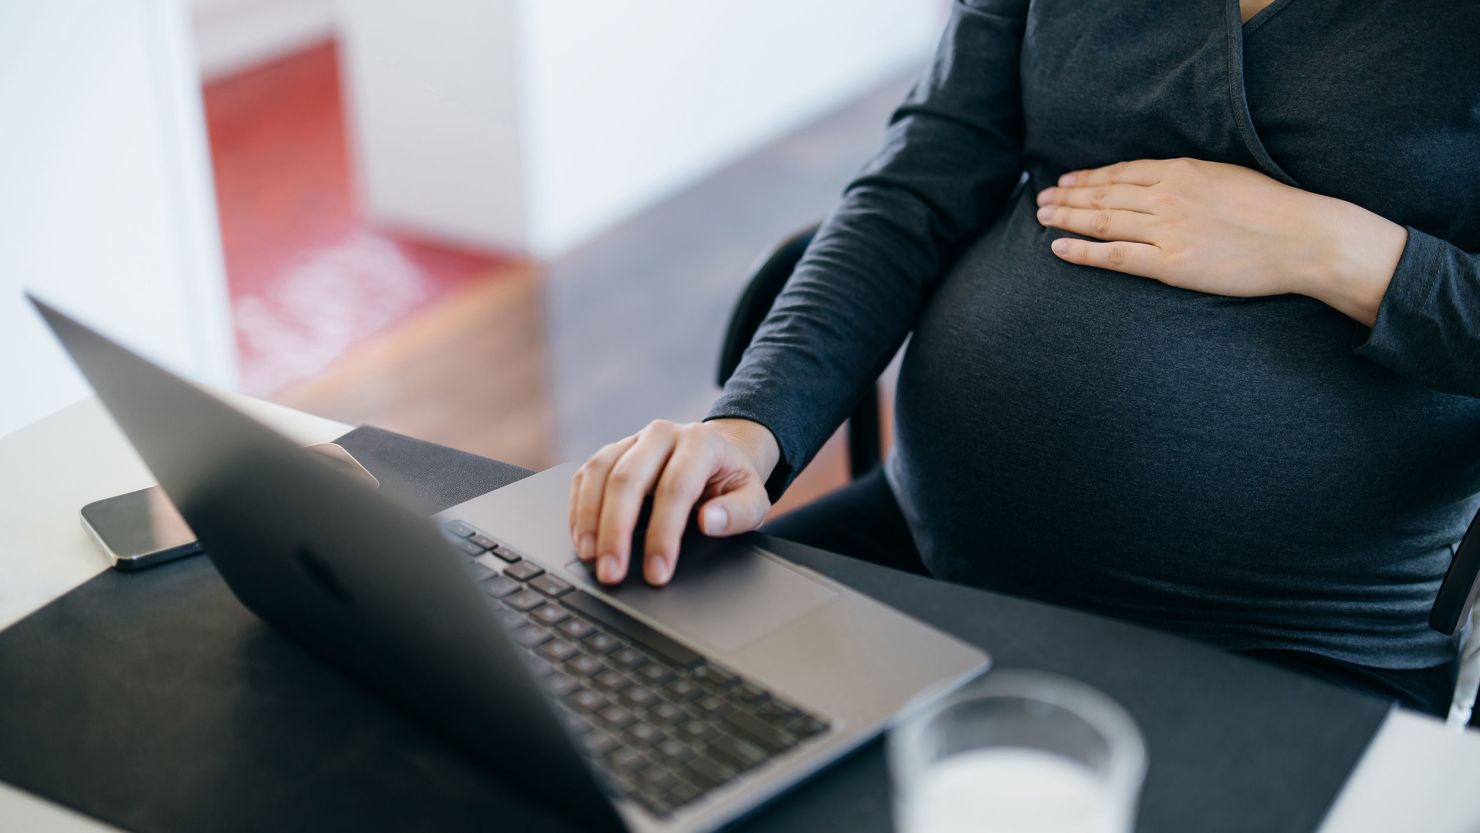 'If all of us moms embraced this role on the documents designed to capture our qualifications, skills and work experience, we could help upend ugly stereotypes,' writes Kara Alaimo